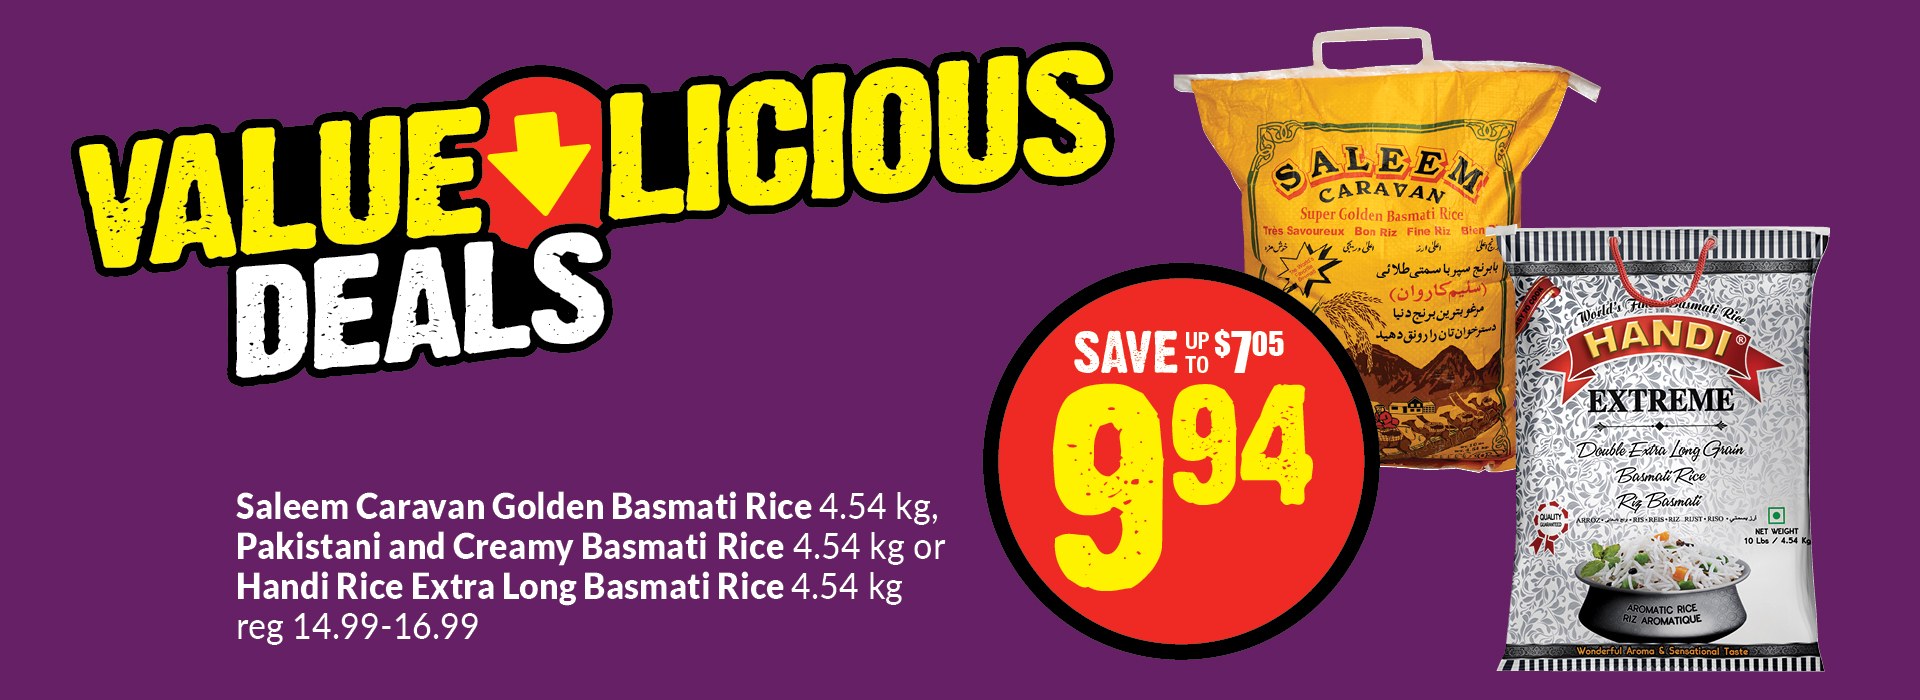 The following image consists of the text,"Value Licious Deals, Saleem Caravan Golden Basmati Rice 4.54 kg, Pakistani and Creamy Basmati Rice 4.54 kg or Handi Rice Extra Long Basmati Rice 4.54 kg, reg 14.99-16.99."